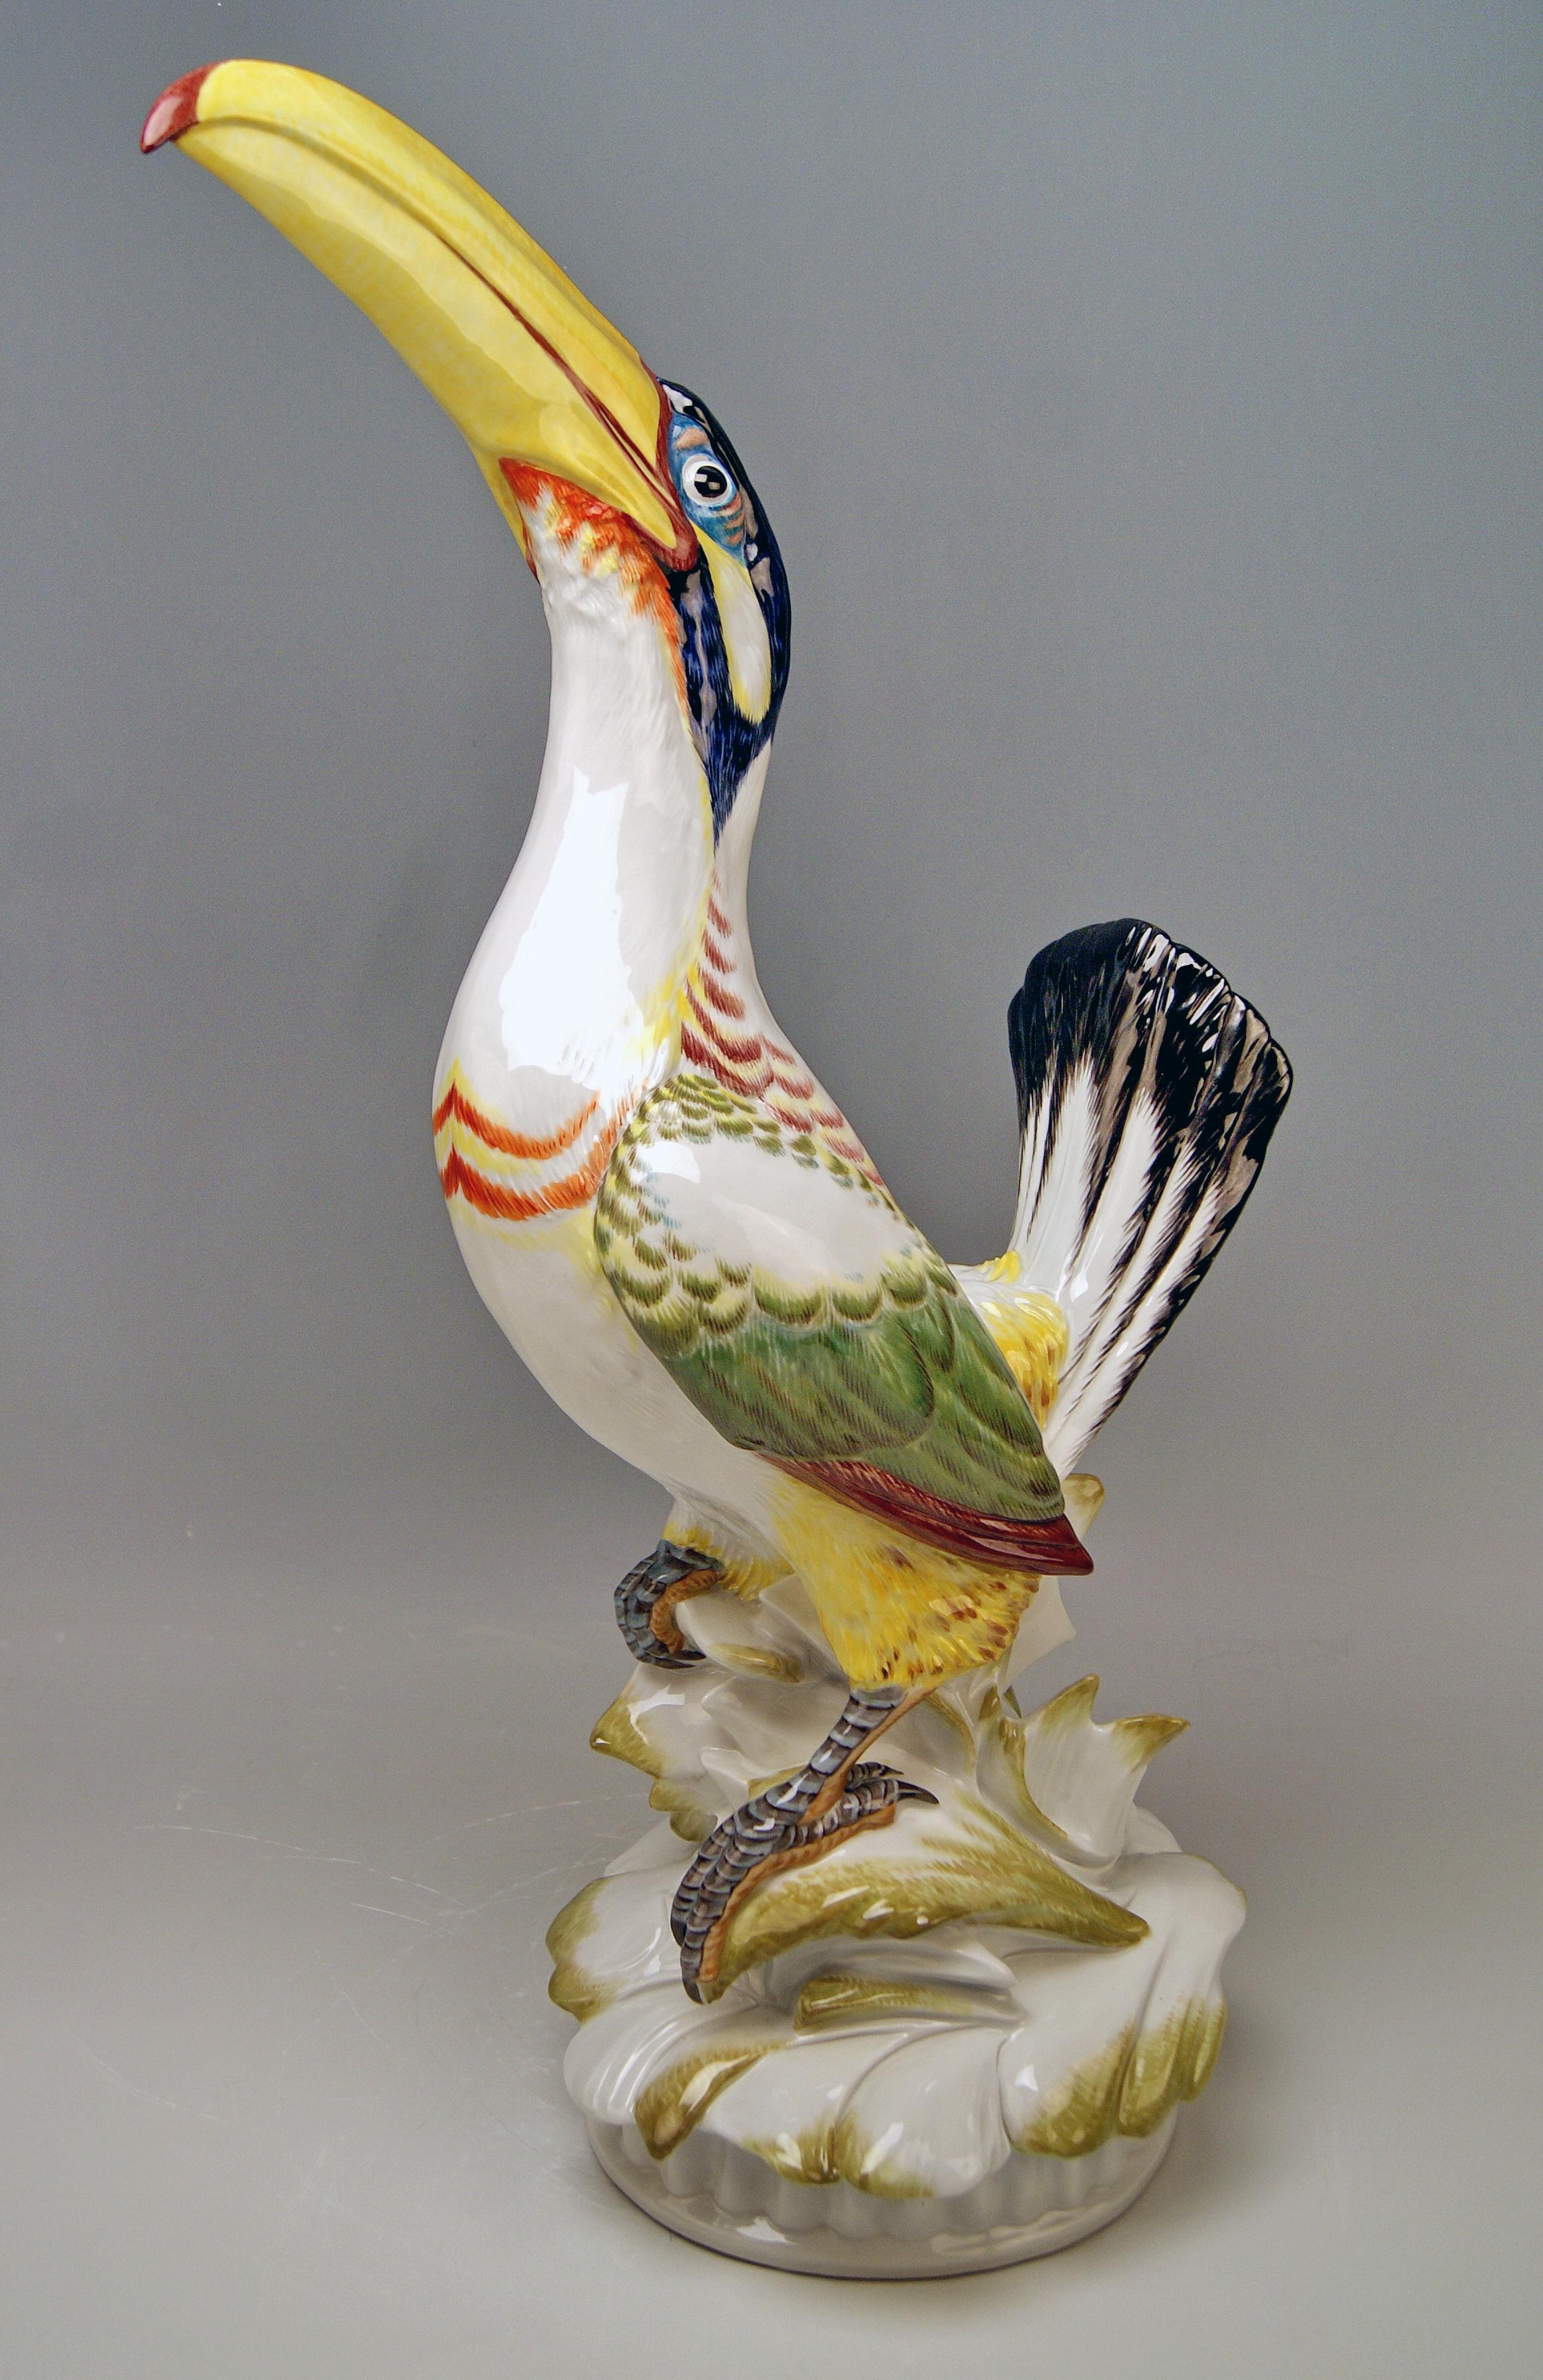 Meissen rare item: Tall Guianan Toucanet
Model 76025

Size:
Height: 22.83 inches (58.0 cm)
Diameter of base: 8.26 inches (21.0 cm)

Manufactory: Meissen
Hallmarked: Blue Meissen Sword Mark 
model number 76025 
former's number